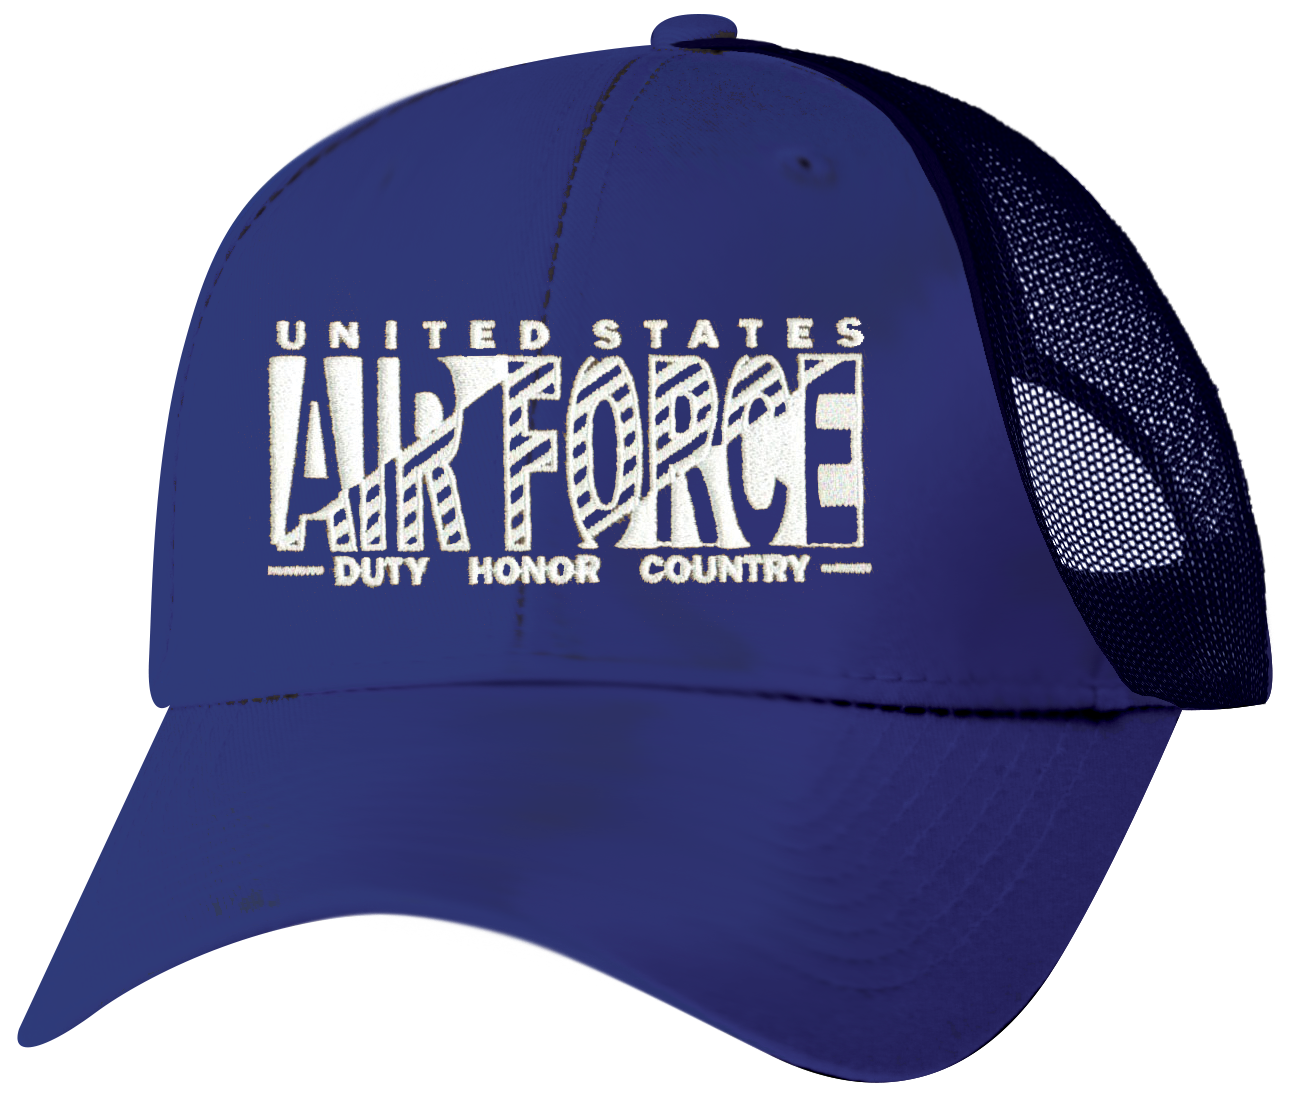 United States Air Force Duty, Honor, Country on Royal/Black Ball Cap